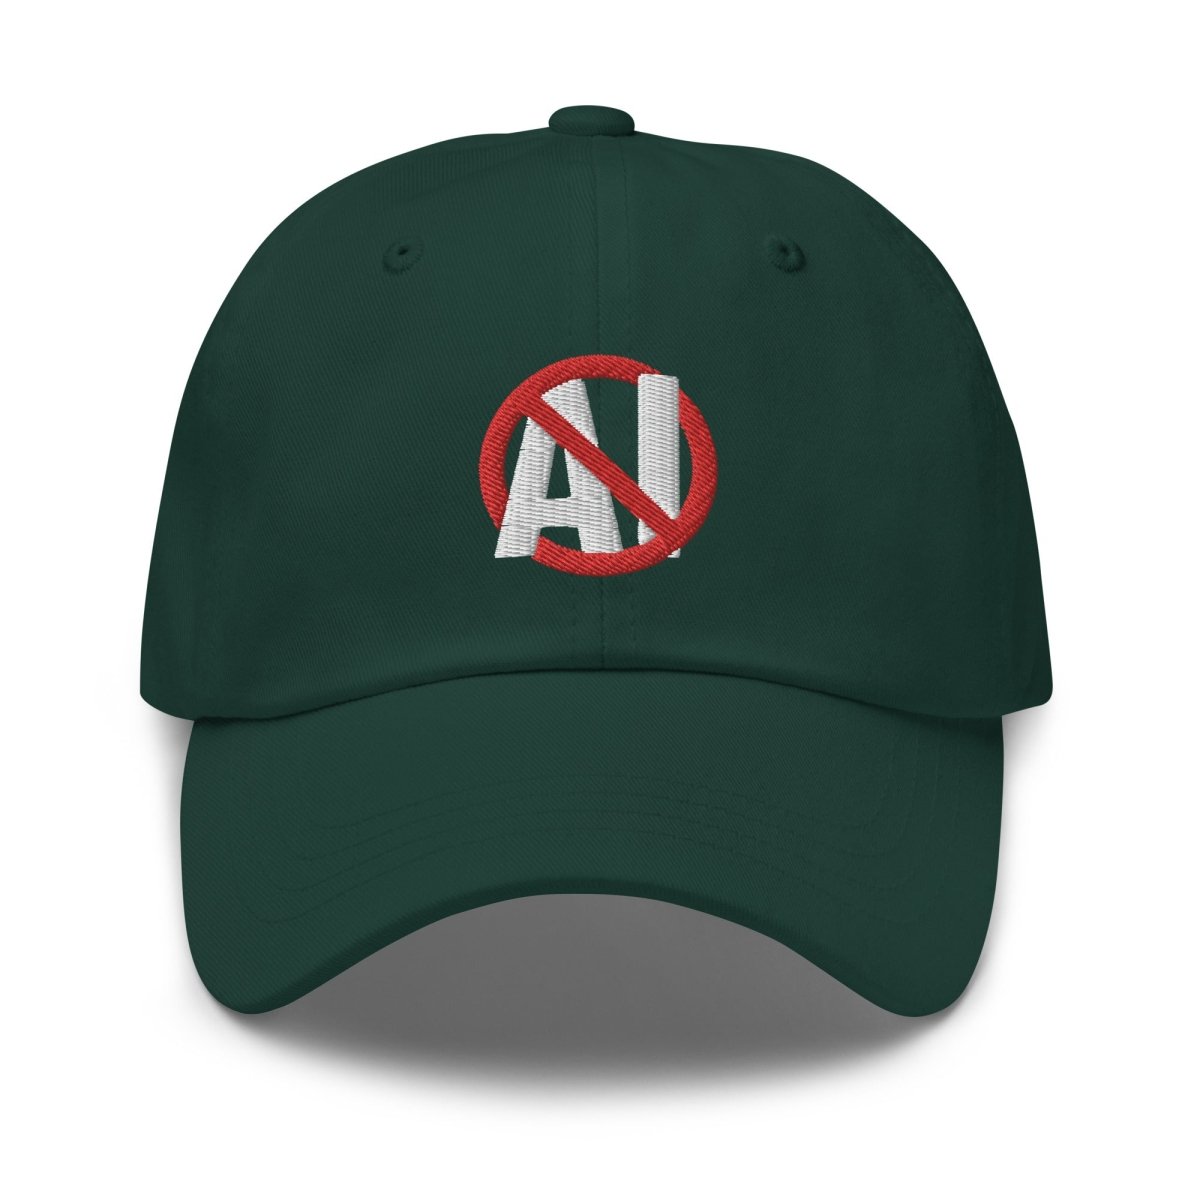 Stop AI Embroidered Cap - Spruce - AI Store